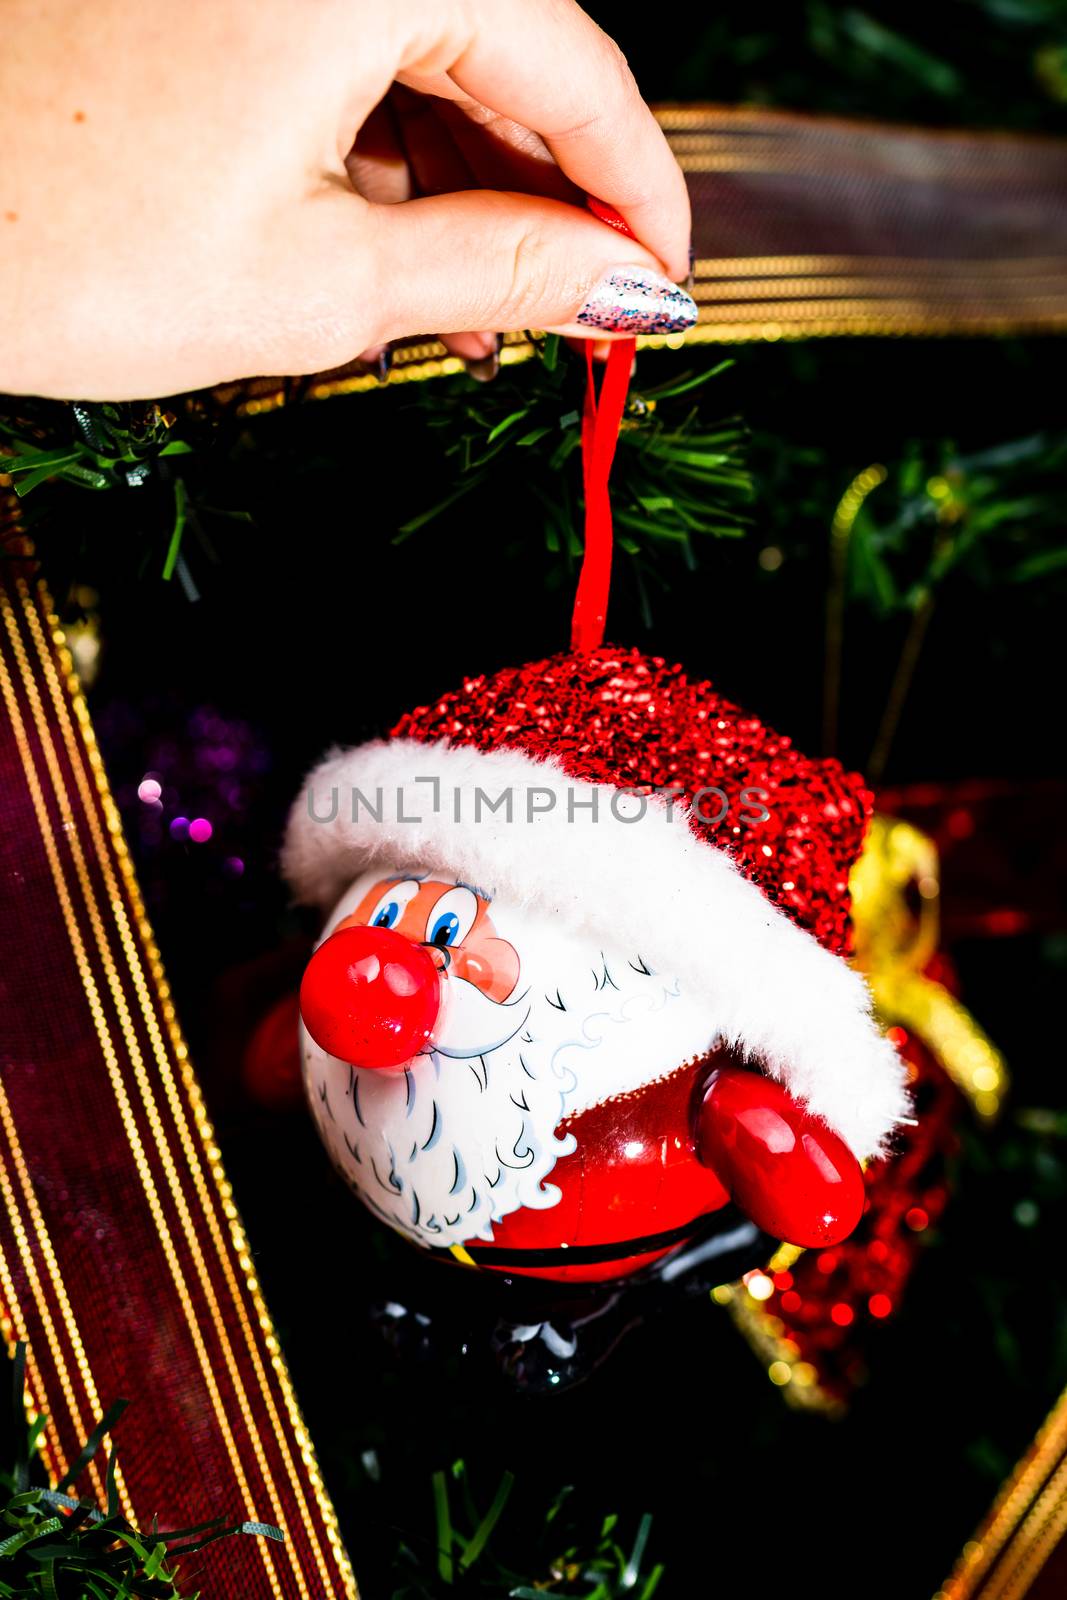 Decorating Christmas tree, hand putting Christmas decorations on fir branches. Christmas hanging decorations.